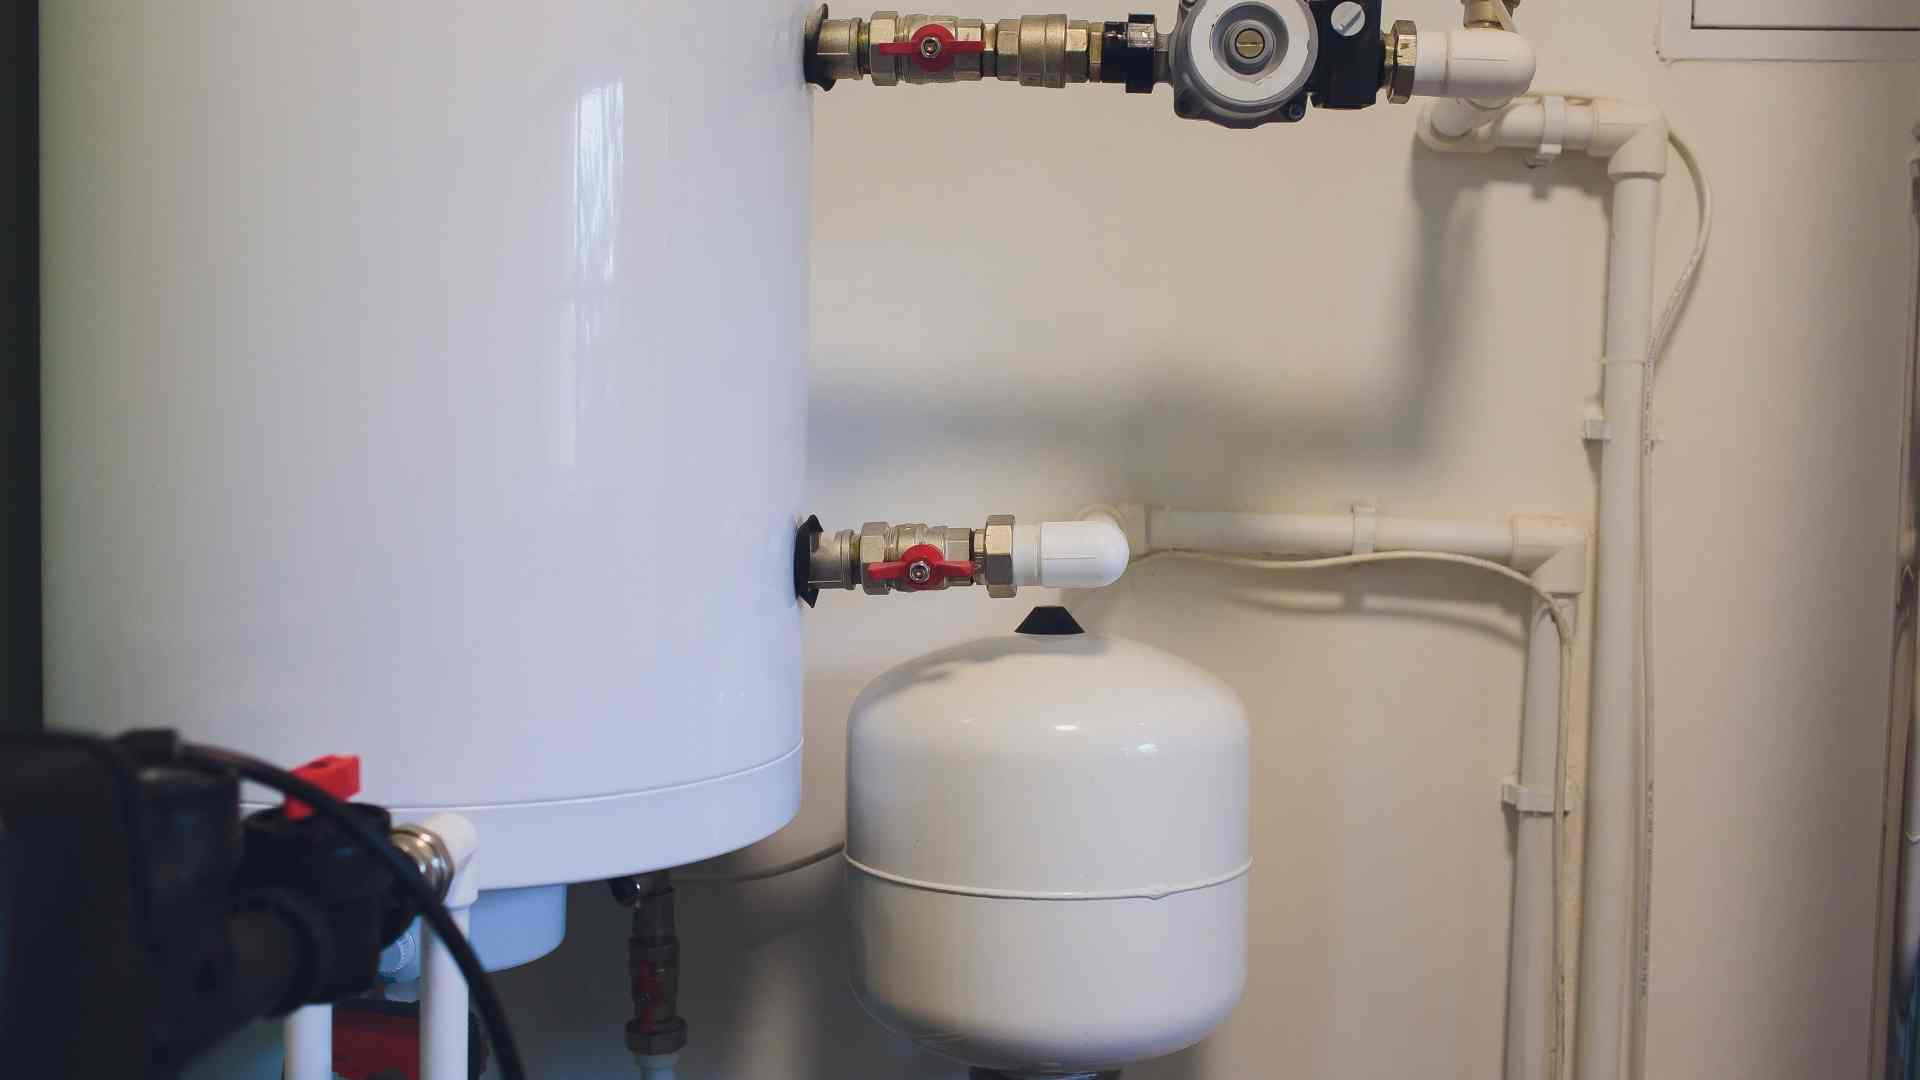 Electric hot water system